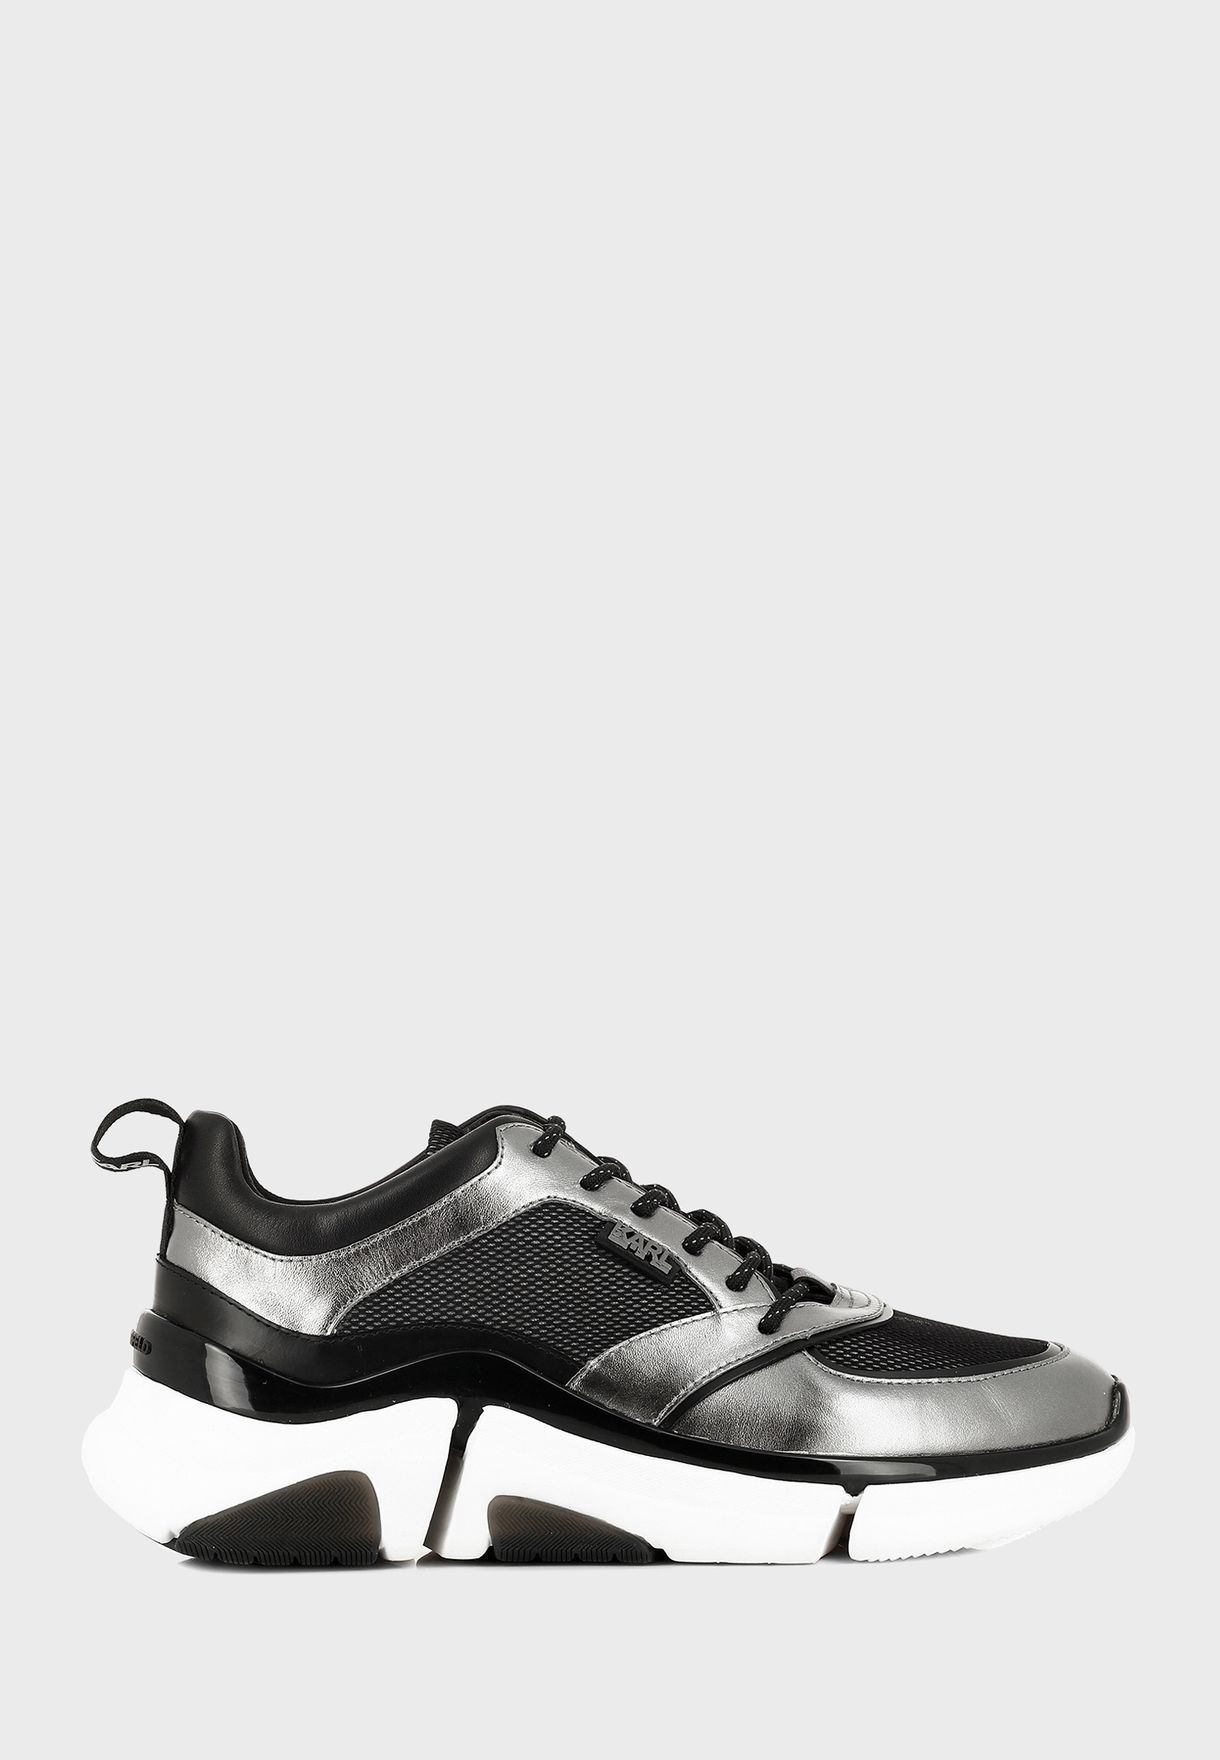 lagerfeld mens shoes